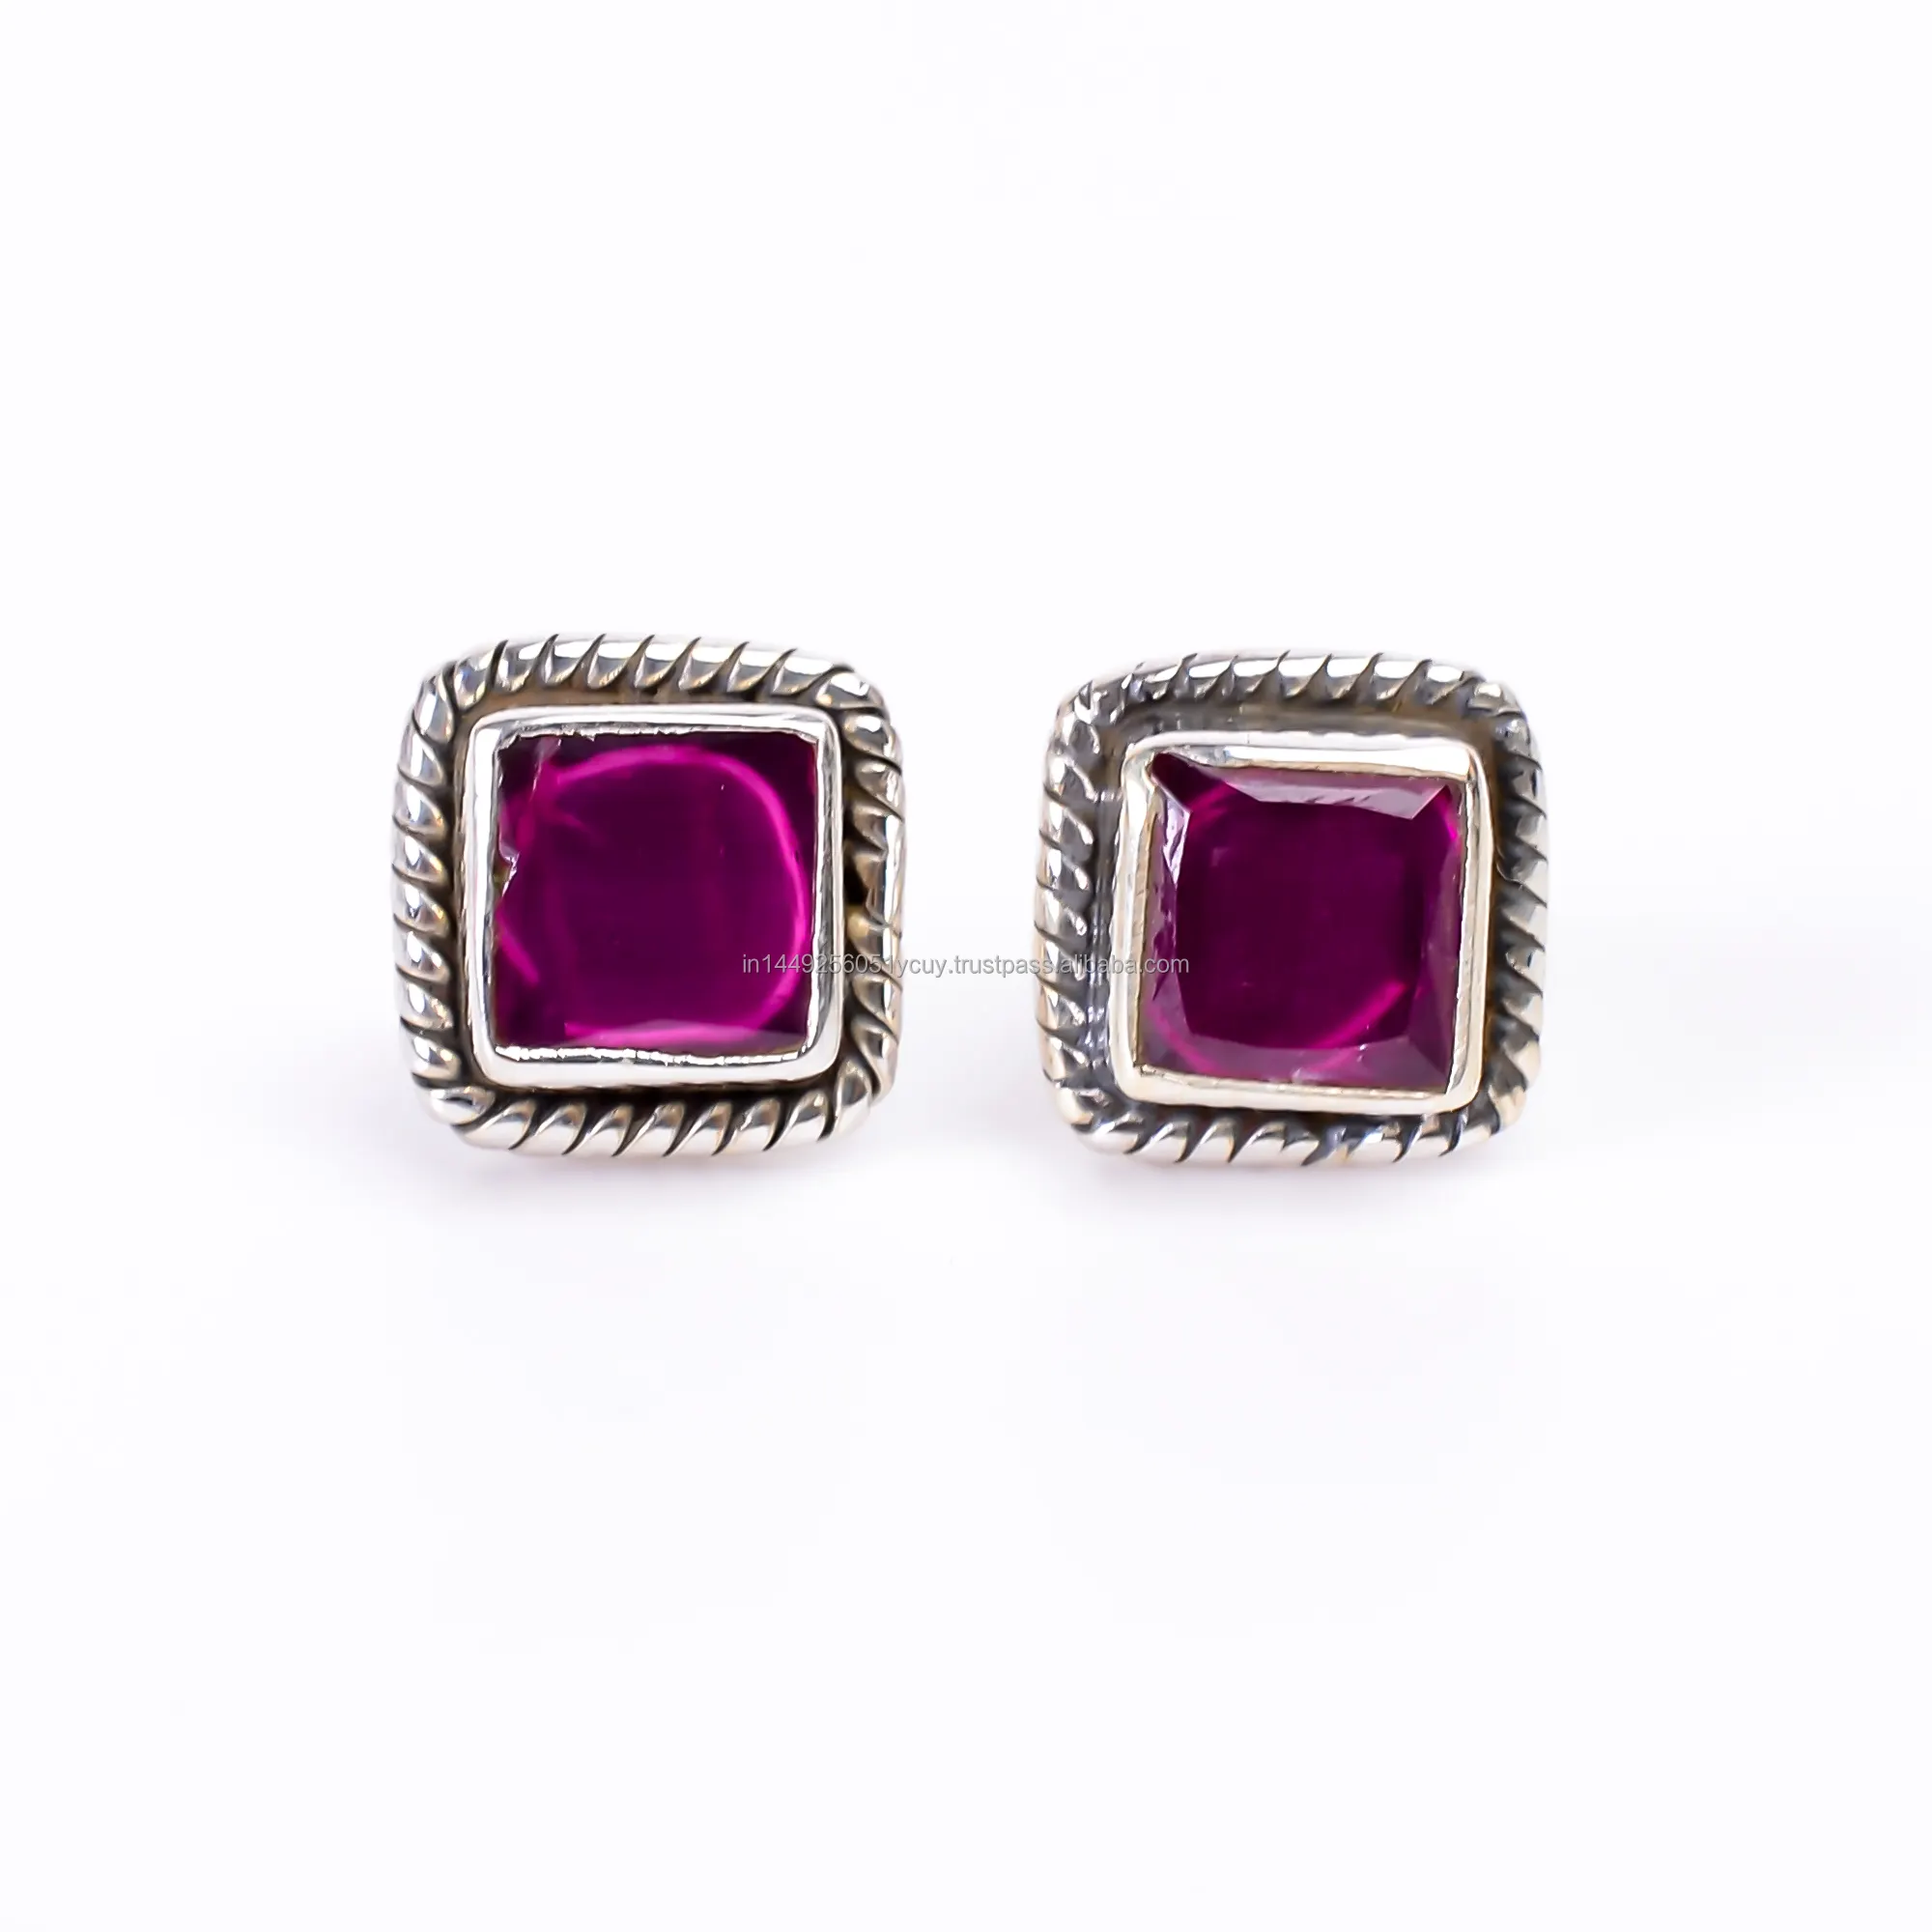 Natural Pink Ruby Square Vintage Handmade Jewelry 925 Sterling Silver Stud Earrings Gift For Her